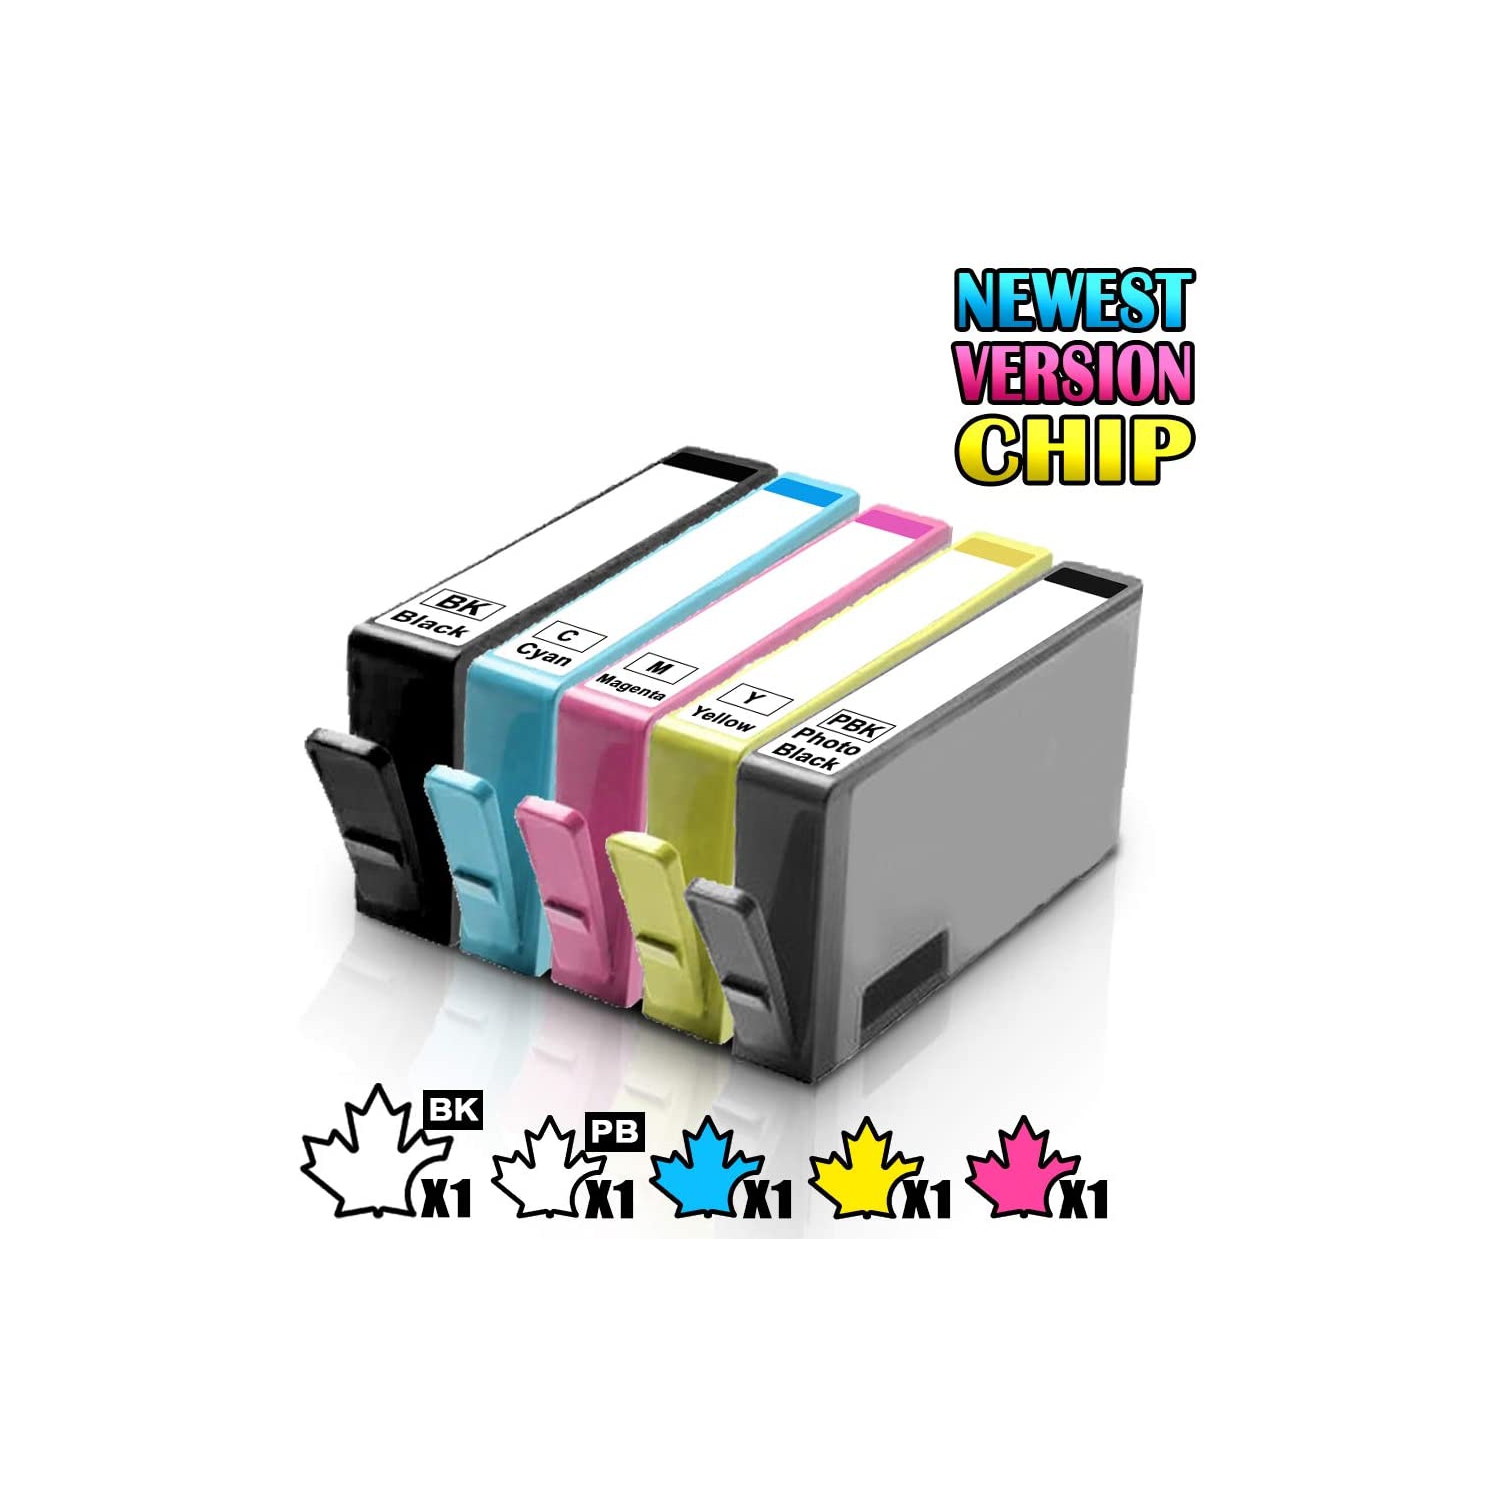 1 Set of 5 Inkfirst® Compatible Ink Cartridges Replacement for HP 564 XL 564XL High Yield PhotoSmart 7510 7515 7520 7525 B8550